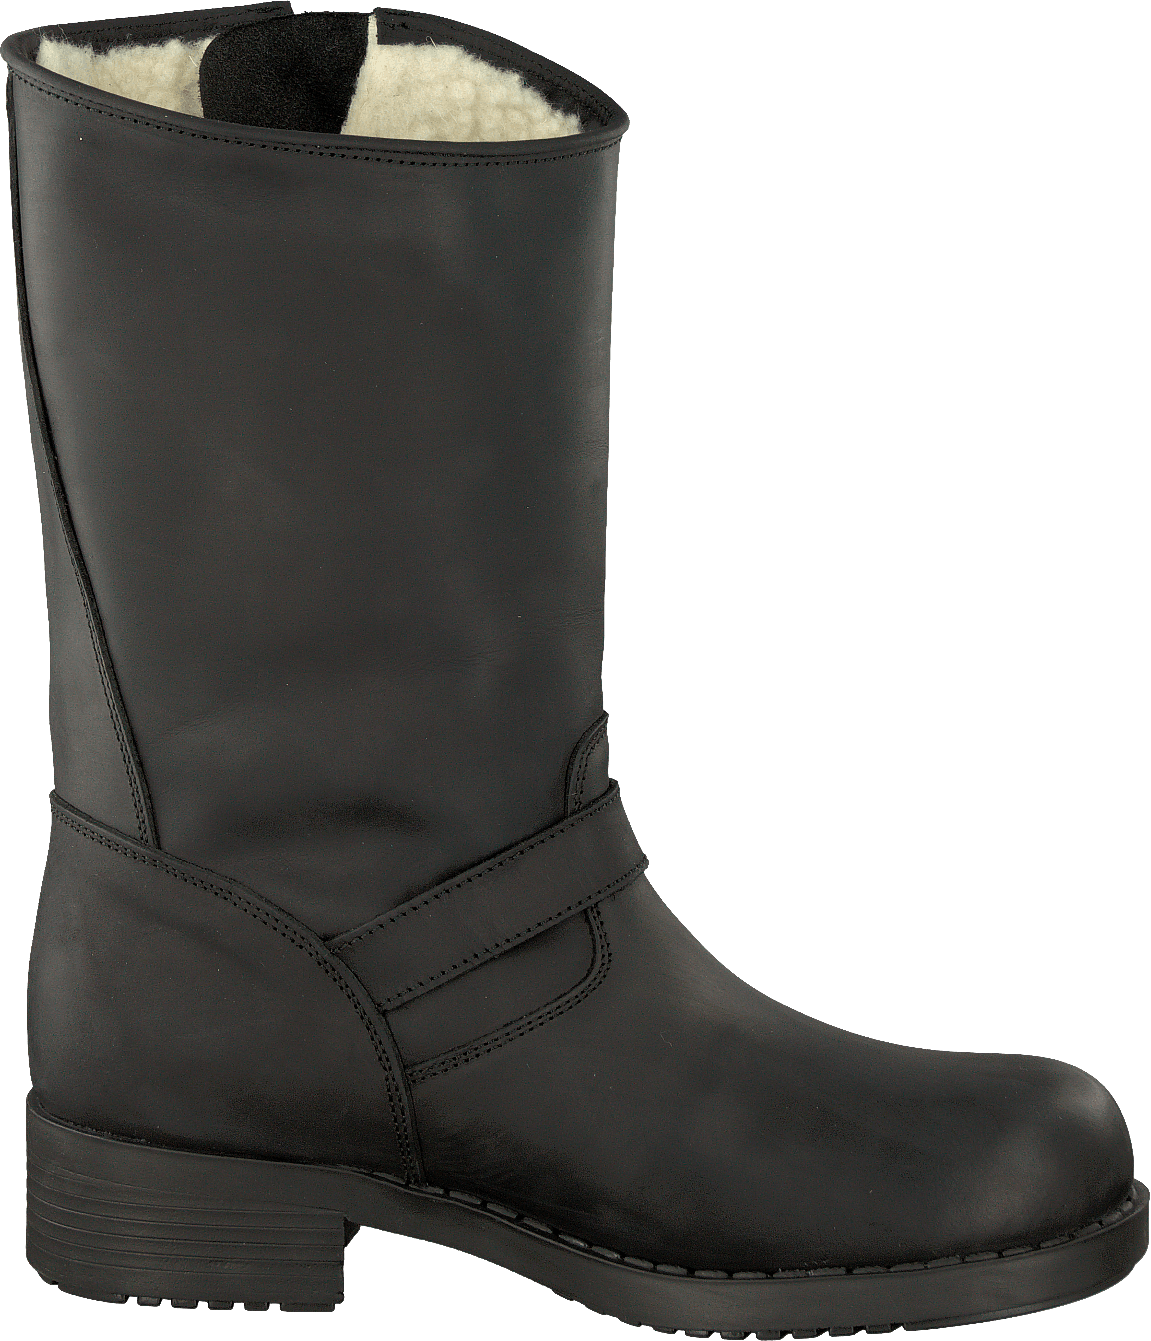 Mid Boot Warm lining Black/Silver